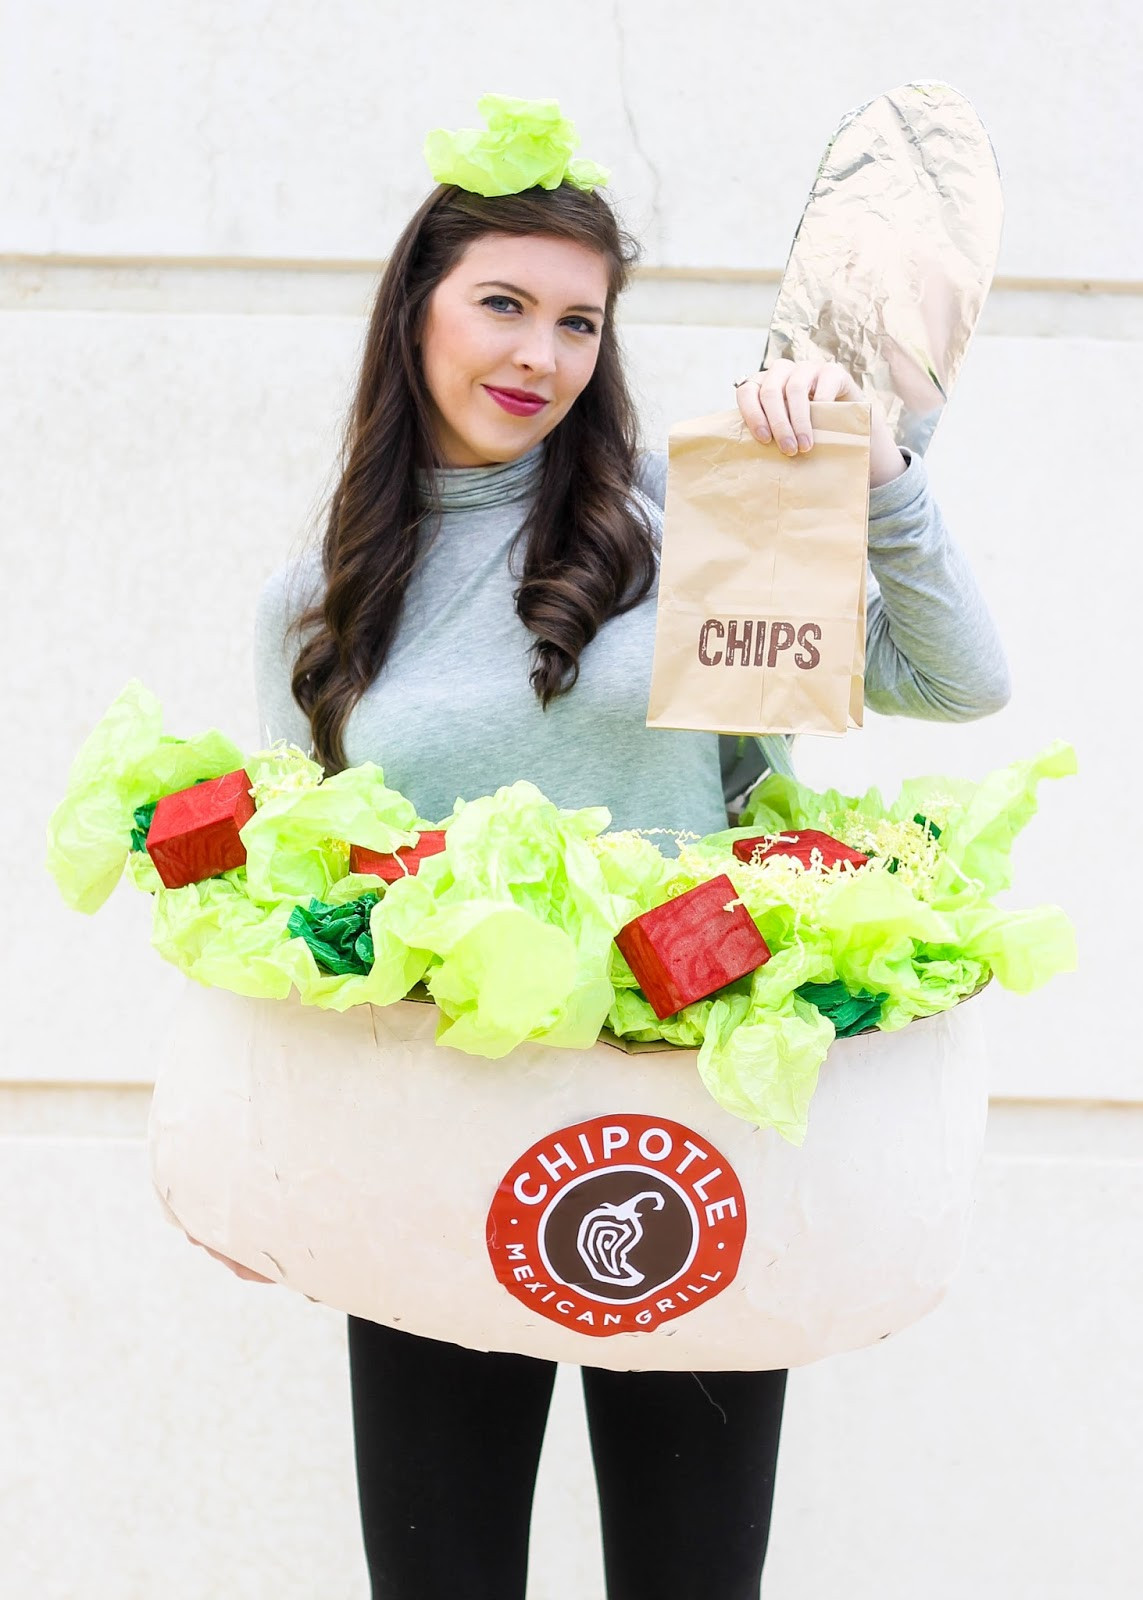 Halloween Costumes DIY
 Halloween Chipotle Costume DIY Pretty in the Pines